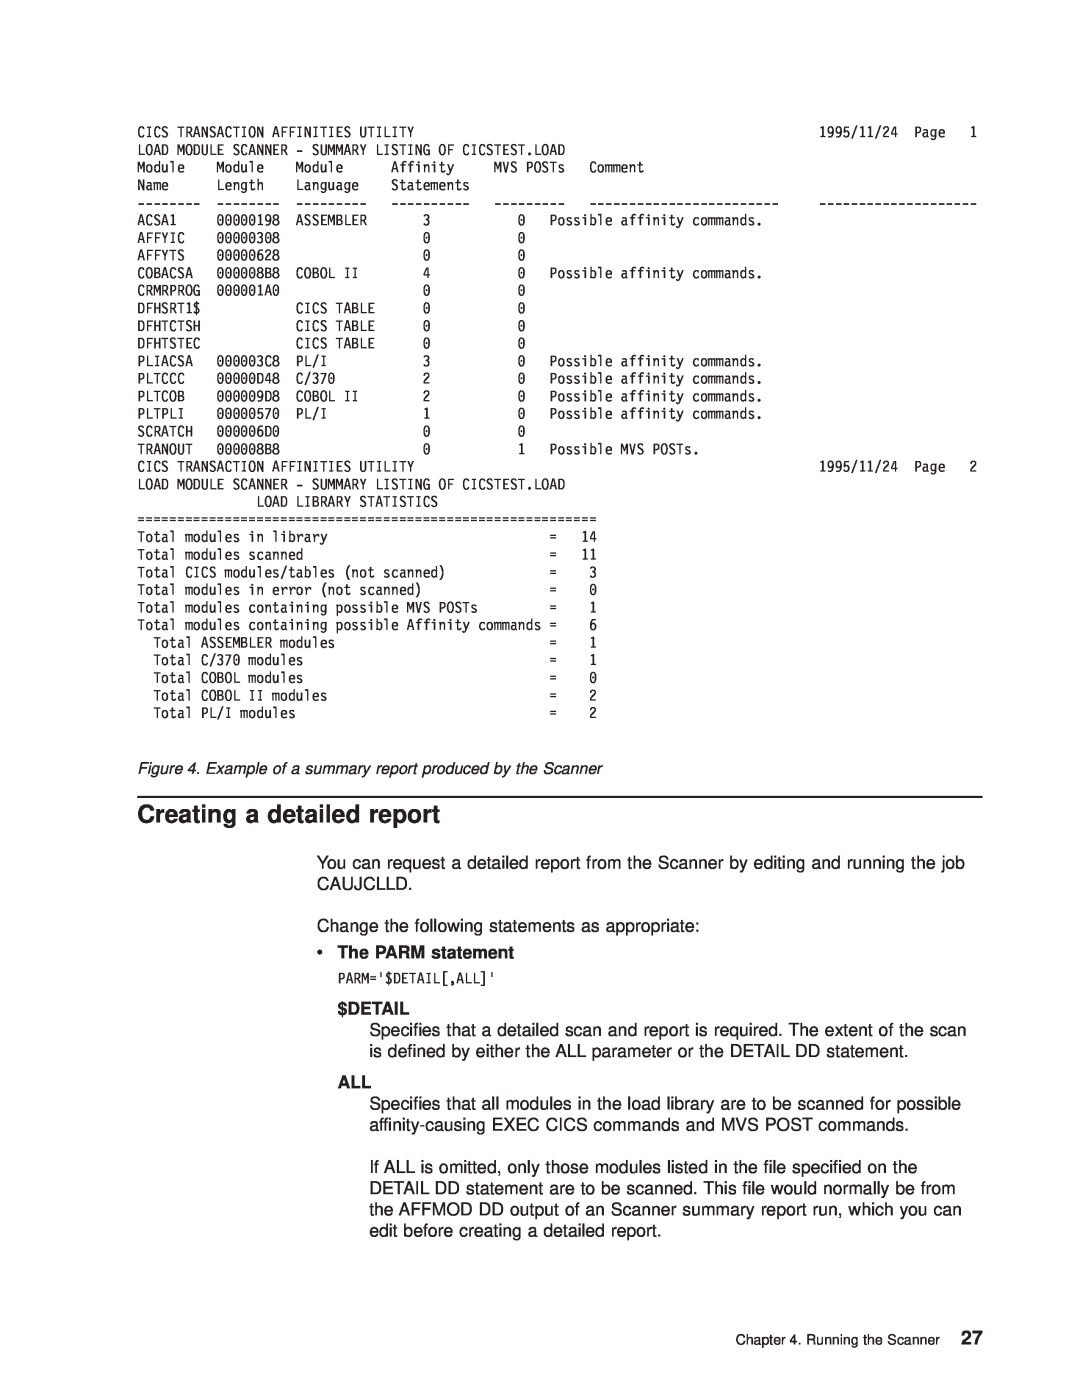 IBM OS manual Creating a detailed report, v The PARM statement, $Detail 